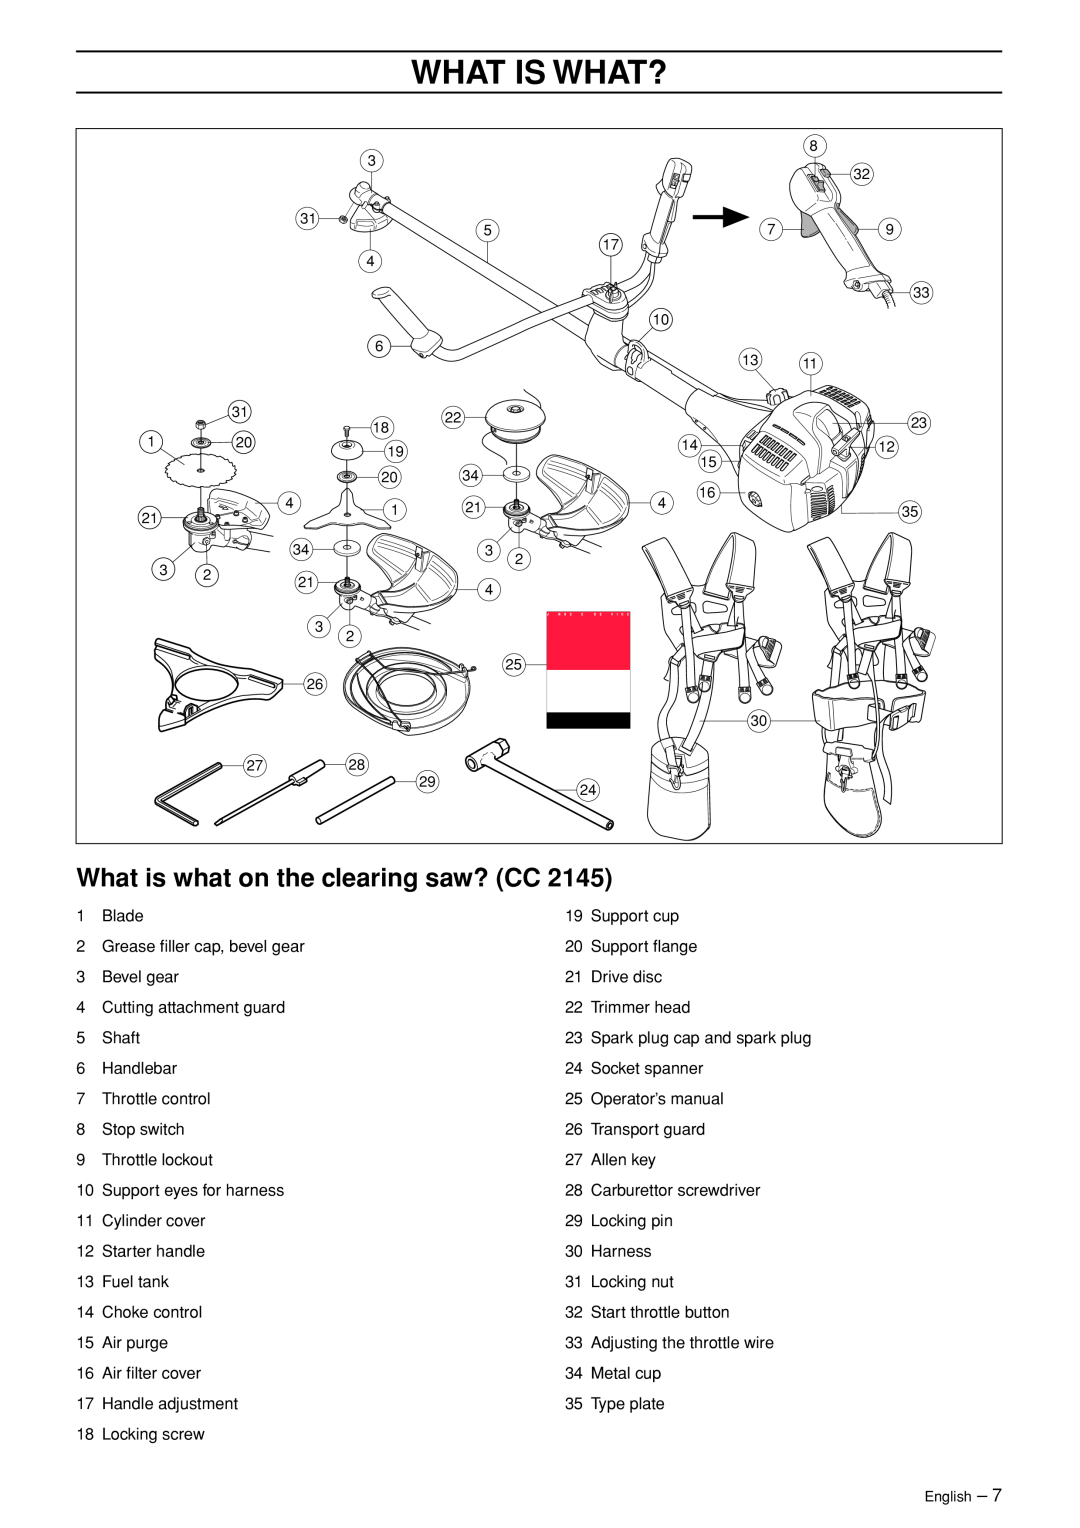 Jonsered CC 2145 manual What is what on the clearing saw? CC, What Is What? 